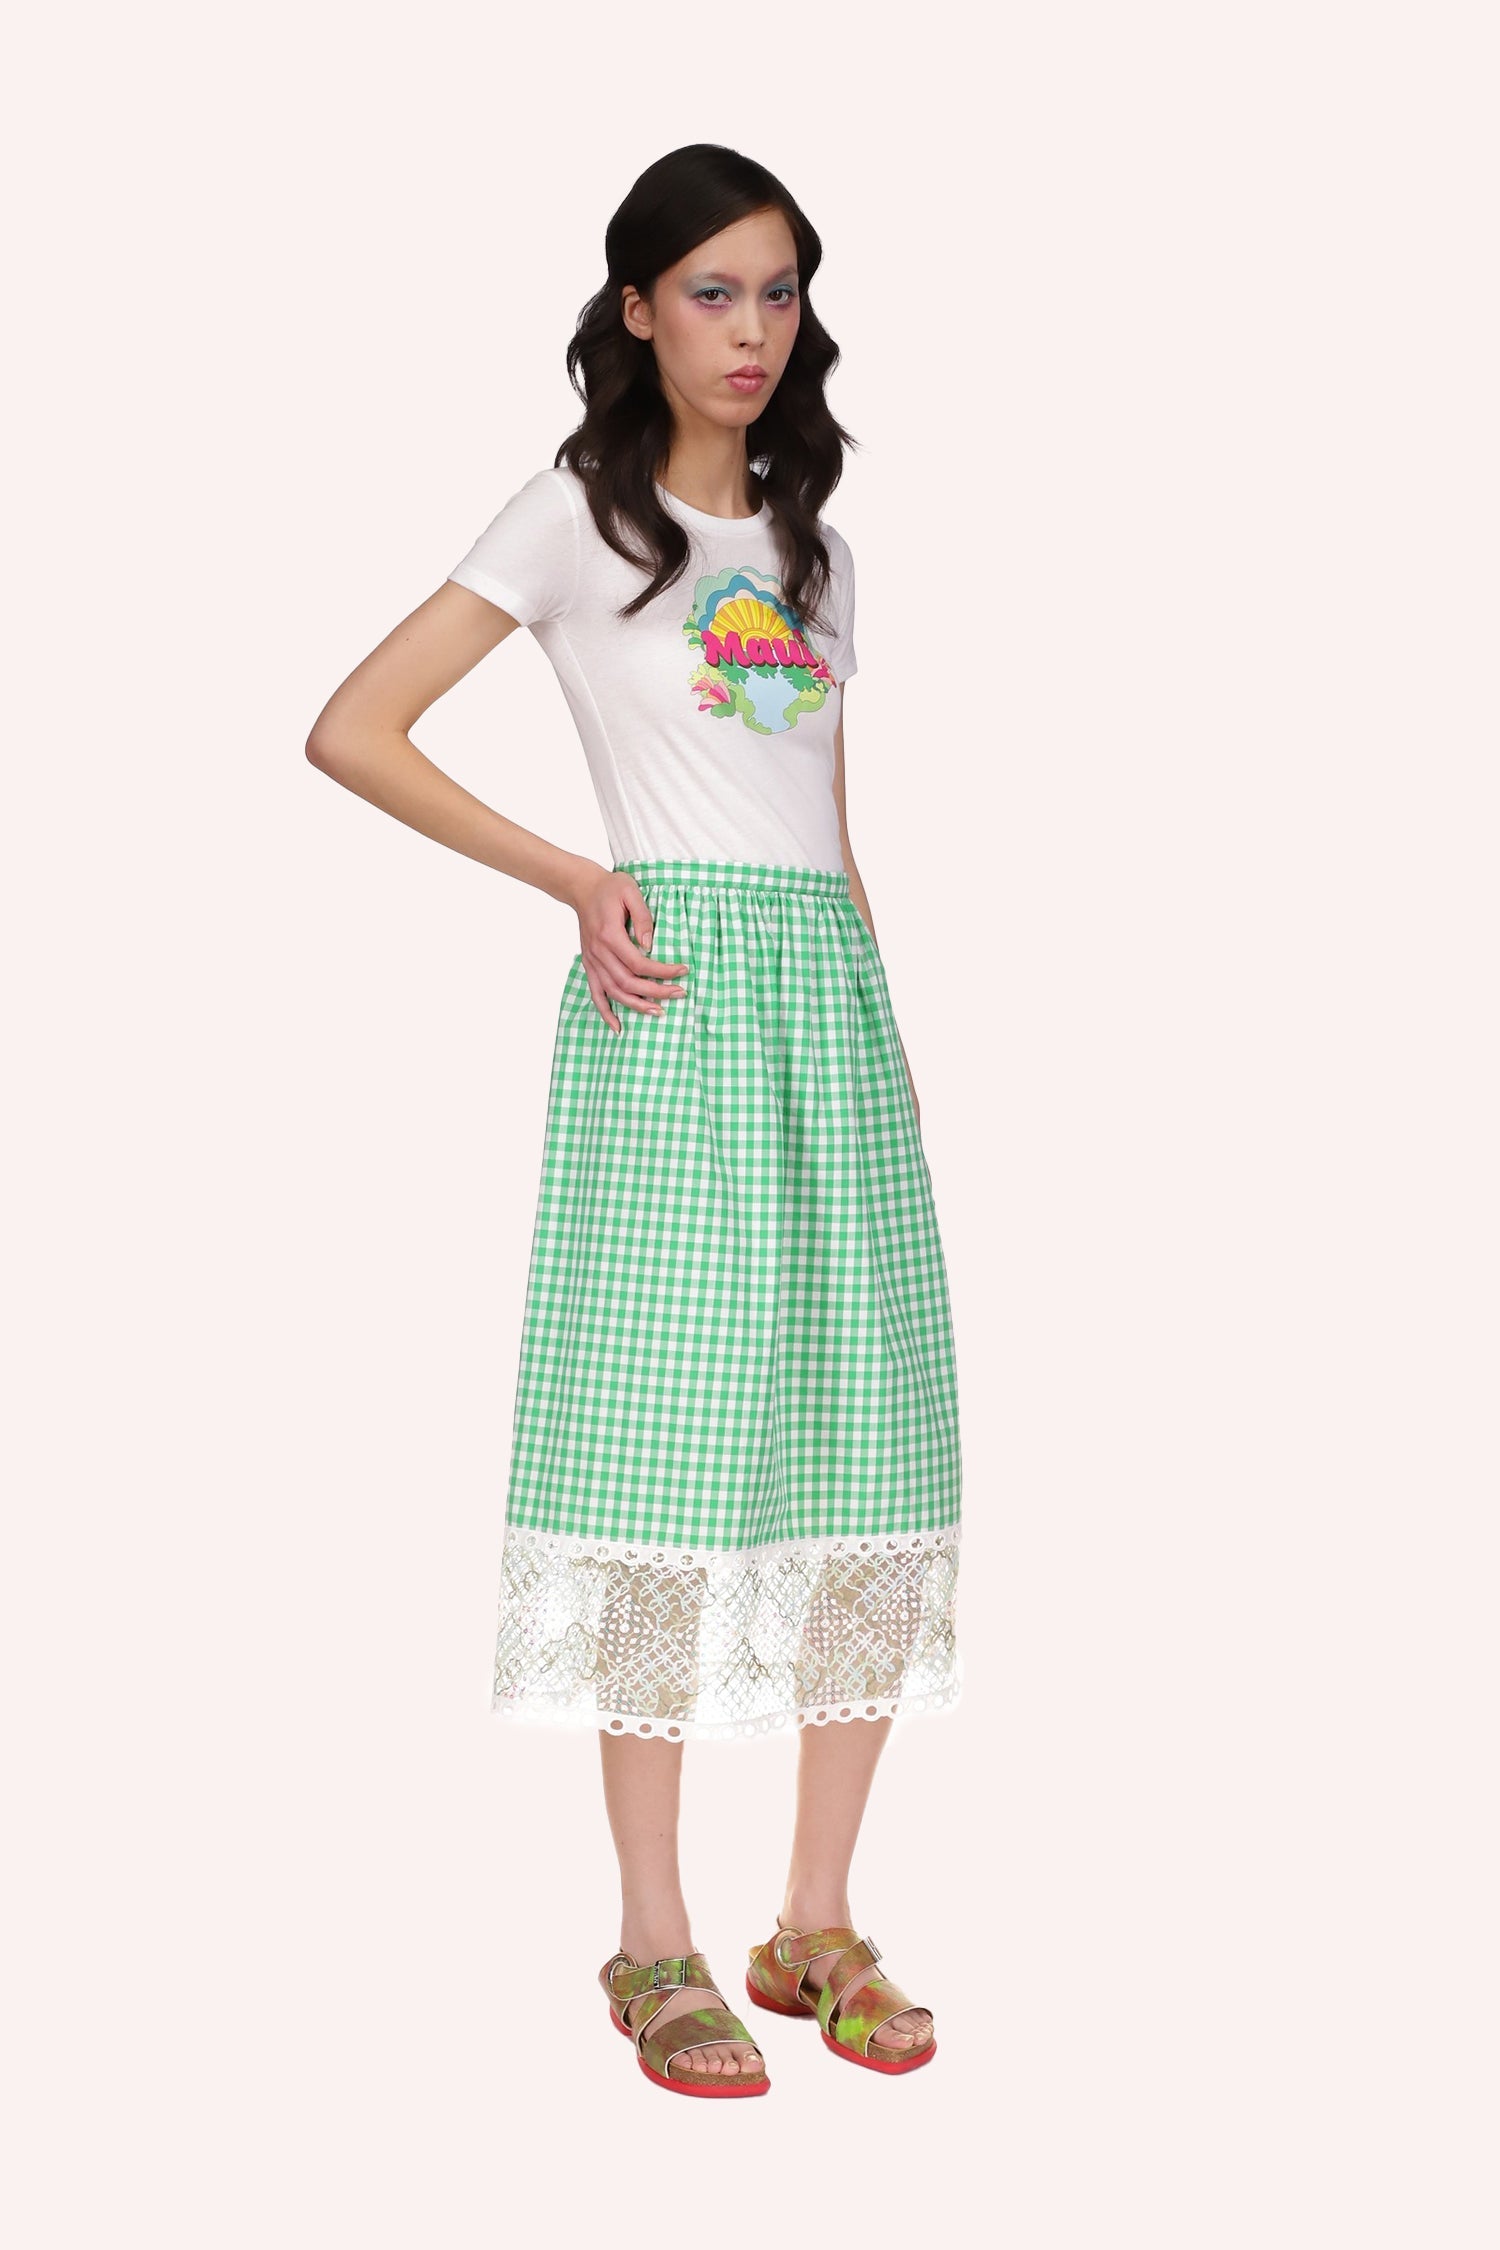 Gingham Skirt is fit at waist and larger from waist down, large see-thru lace at bottom hem